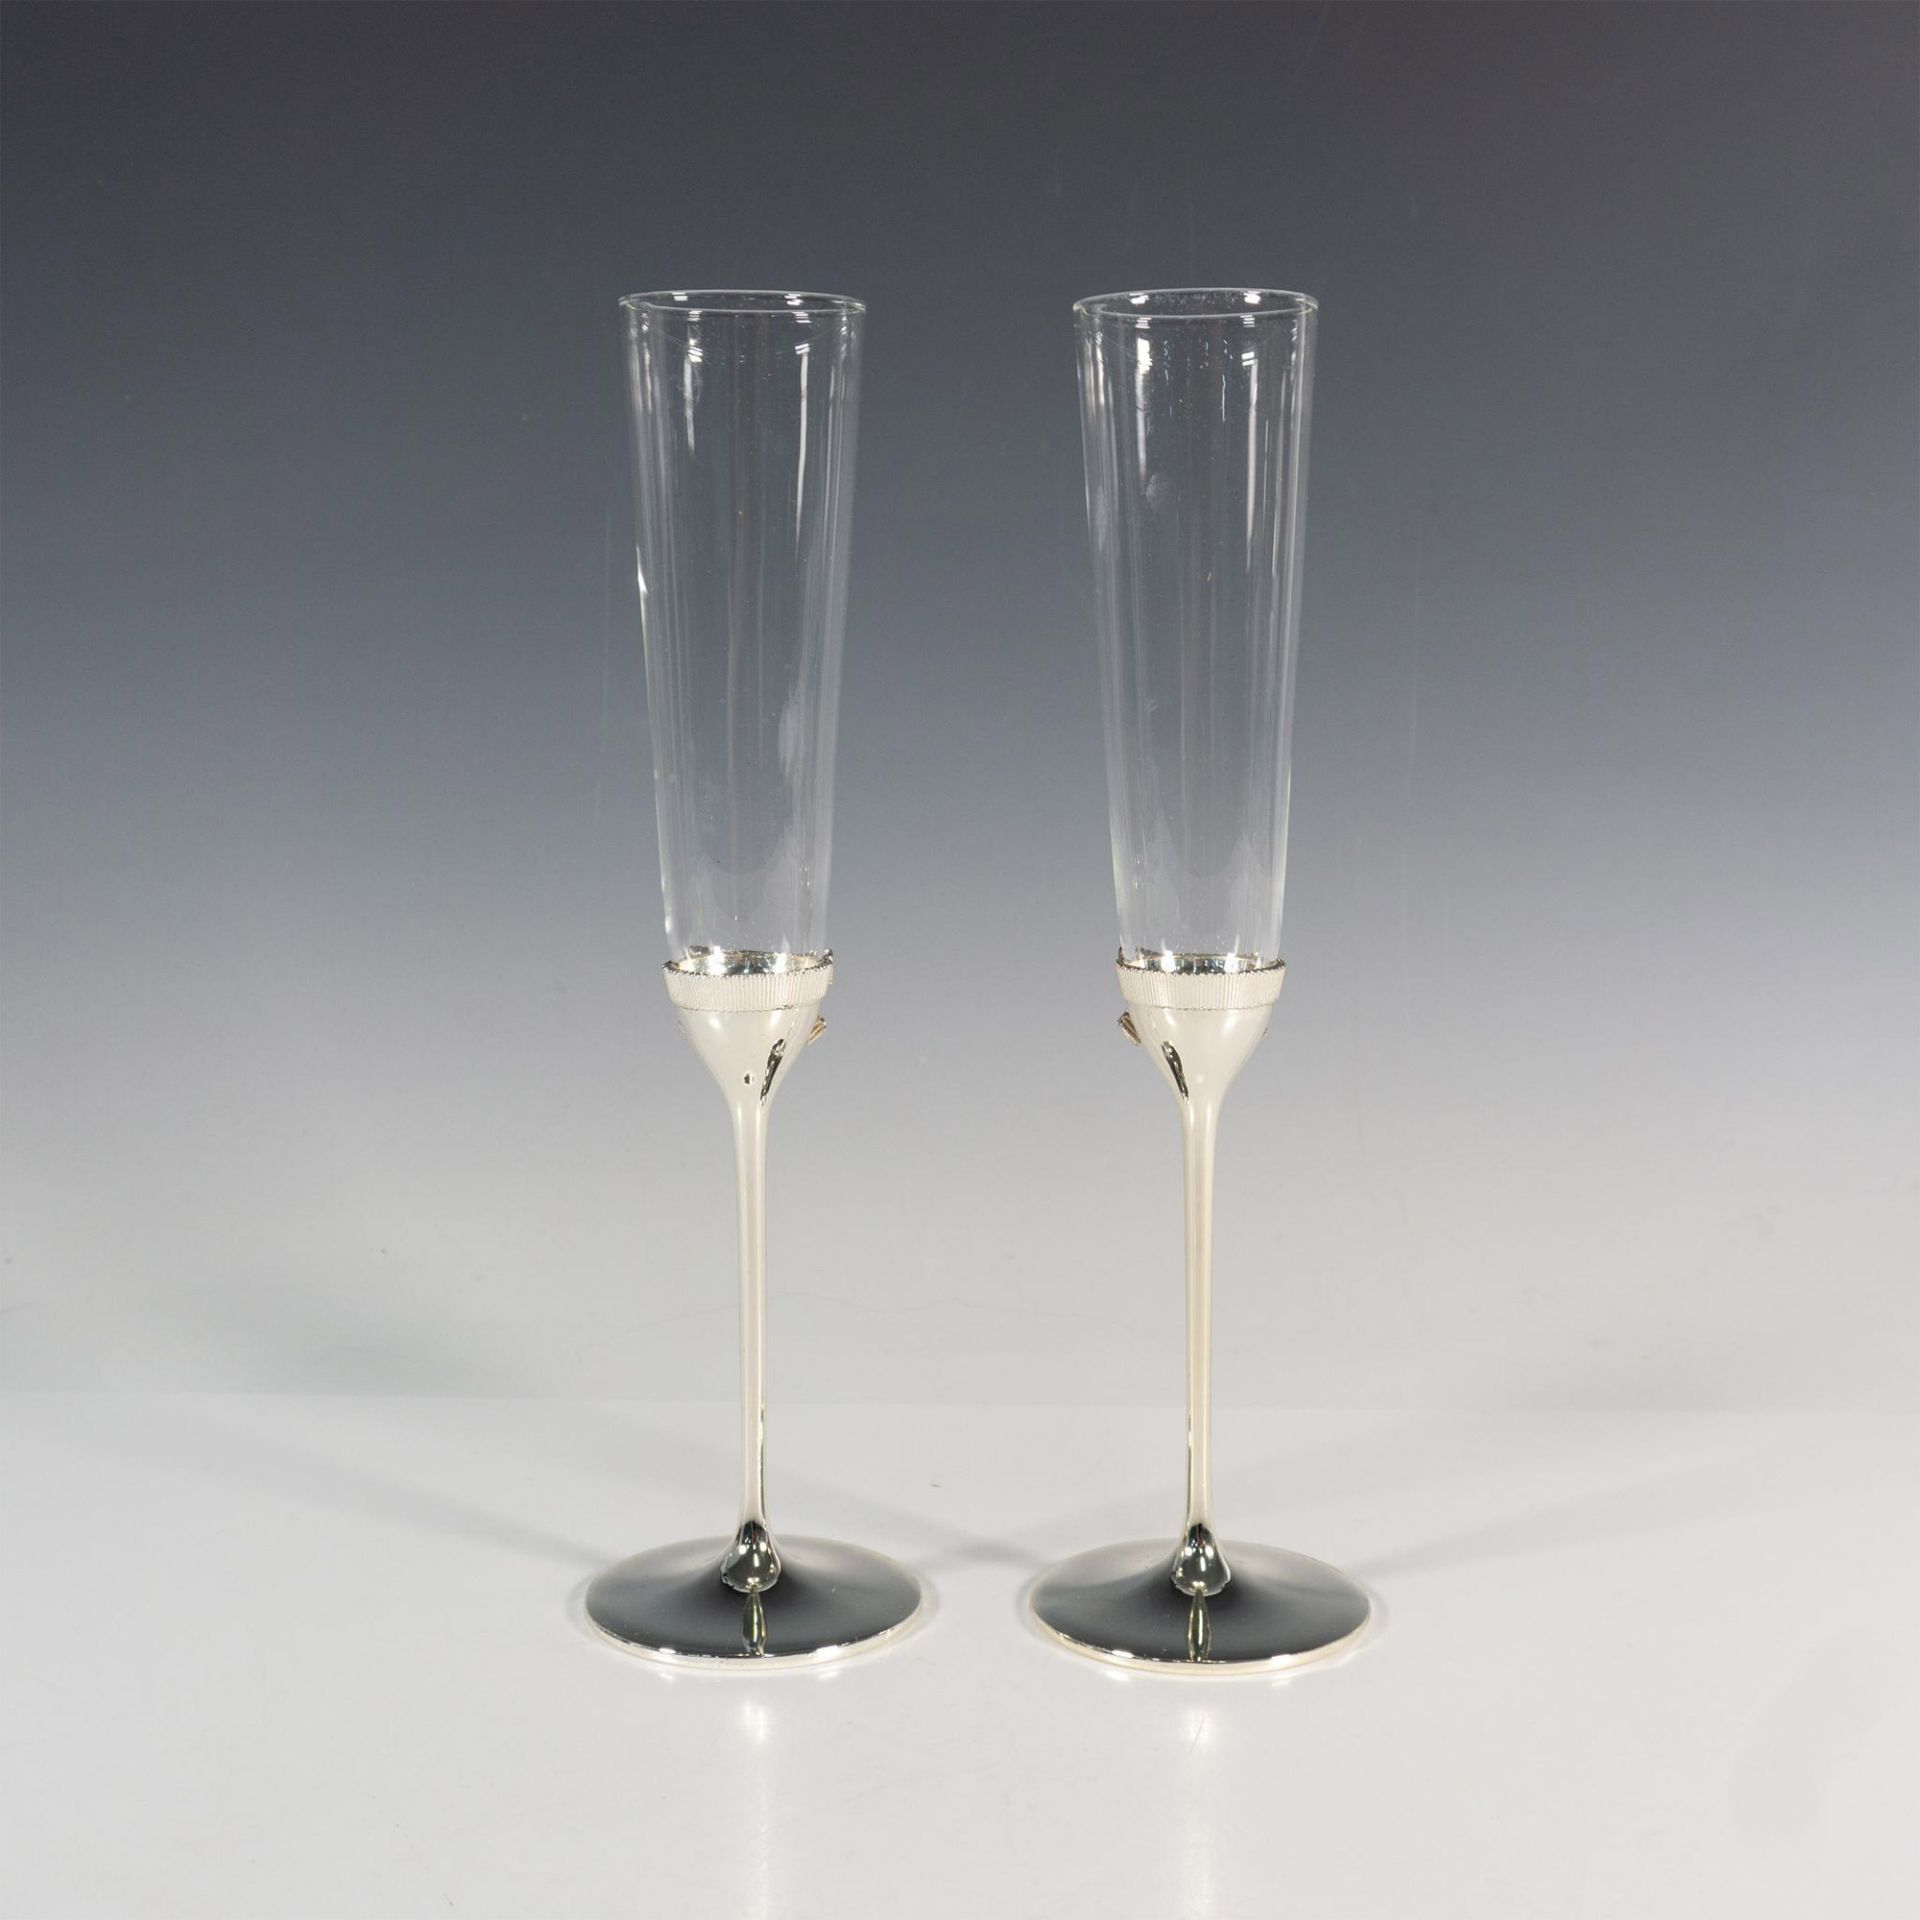 Pair of Kate Spade Toasting Glasses, Grace Ave Pattern